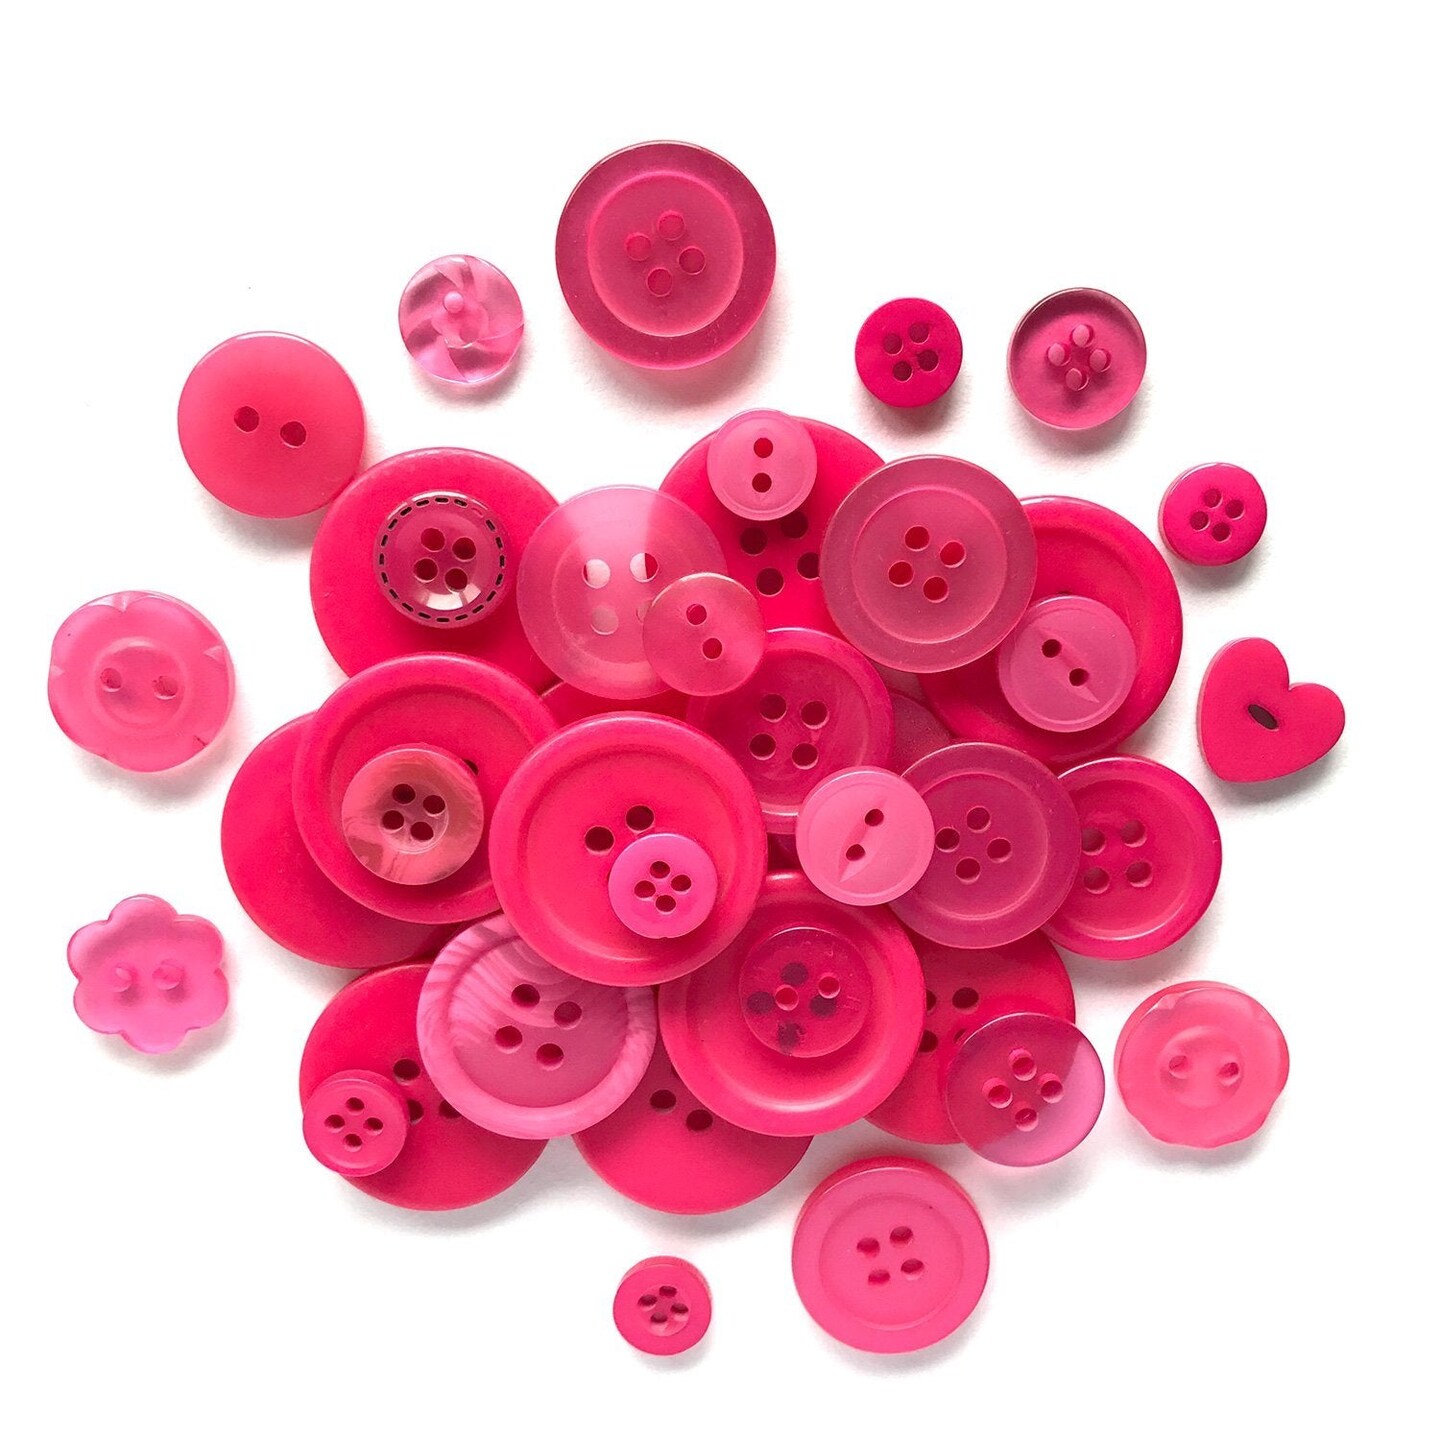 Buttons Galore Button Bonanza Bulk Buttons for Sewing & Crafts, Assorted  Colors - .50 LBS.